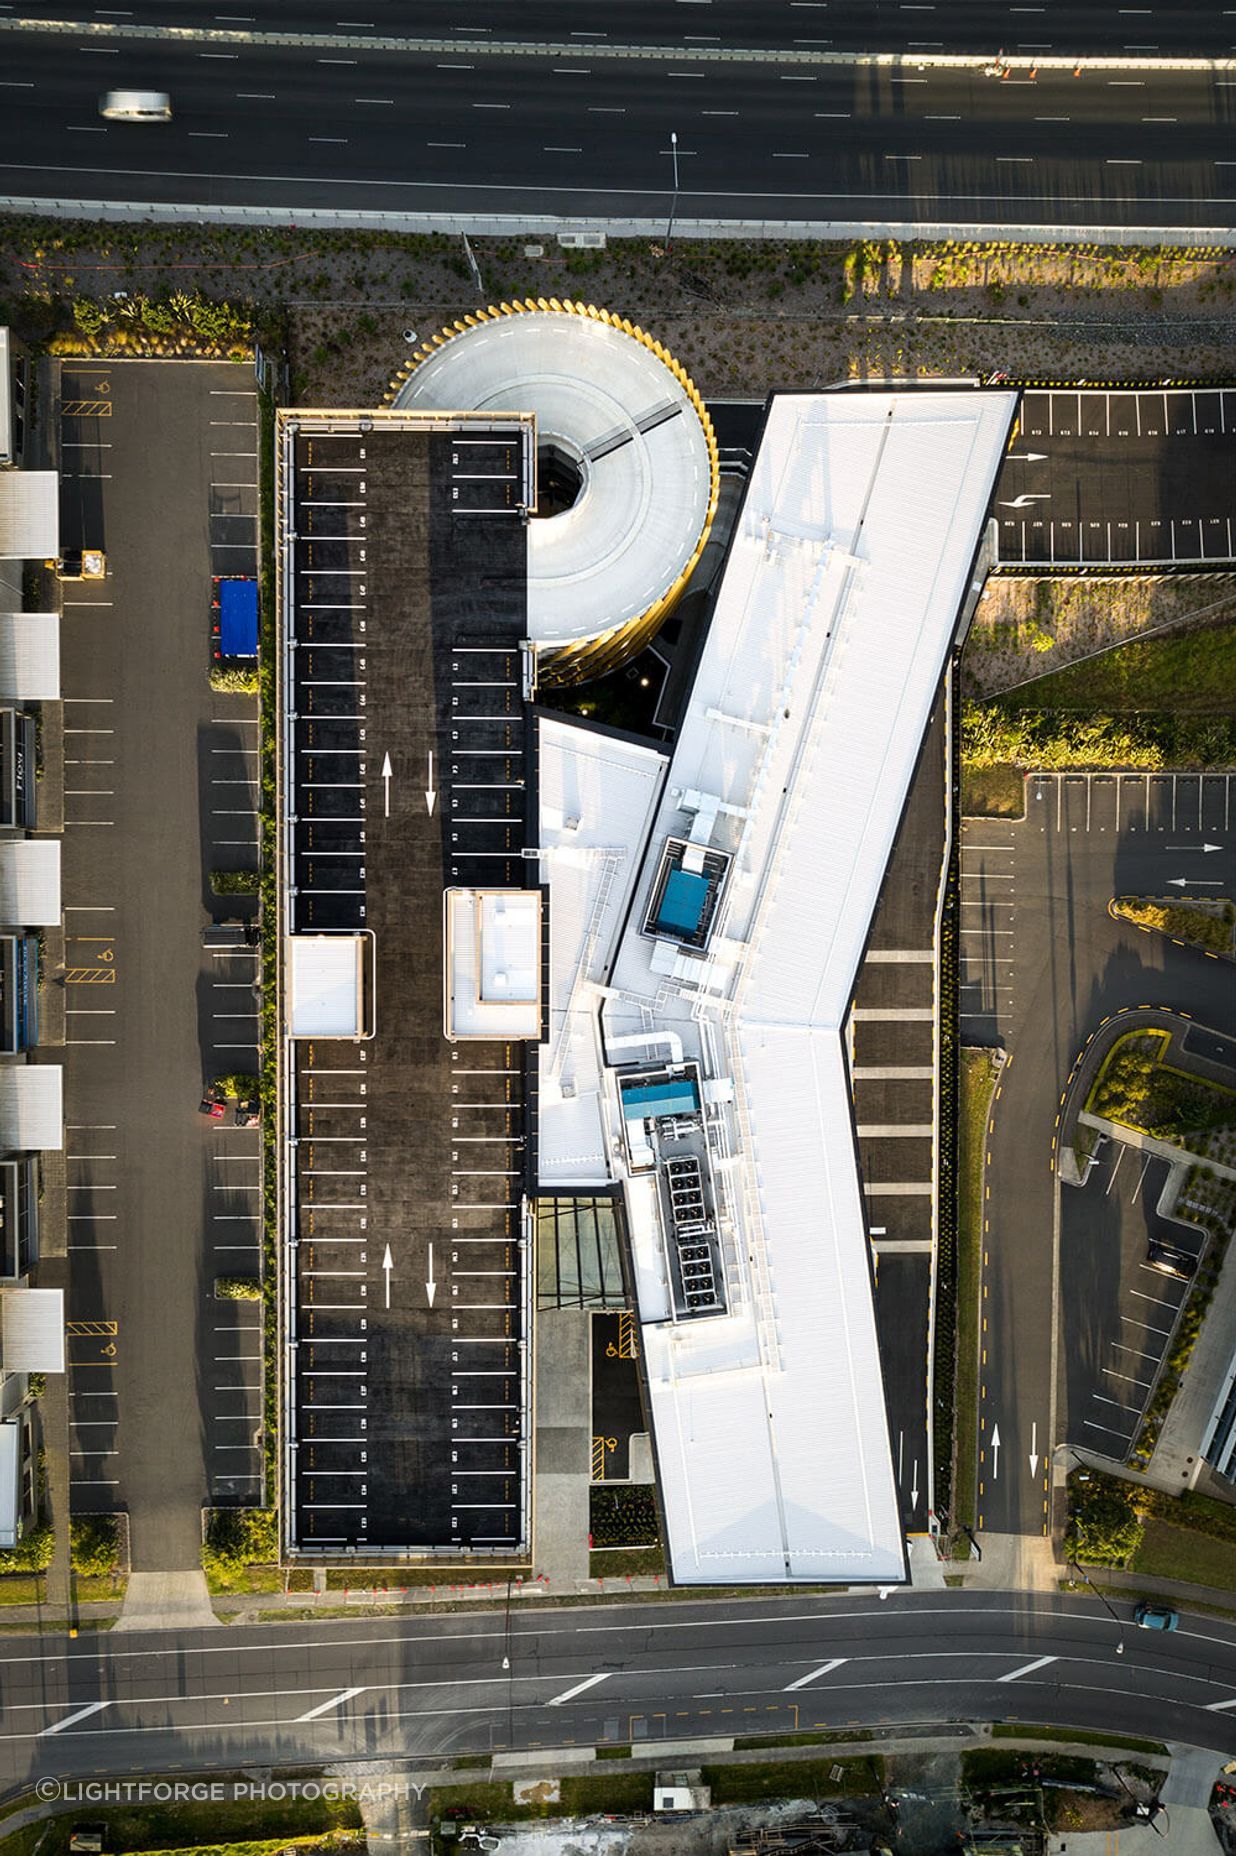 Seen from above, the 1400sqm of office space is complemented with 280 car parks on site.